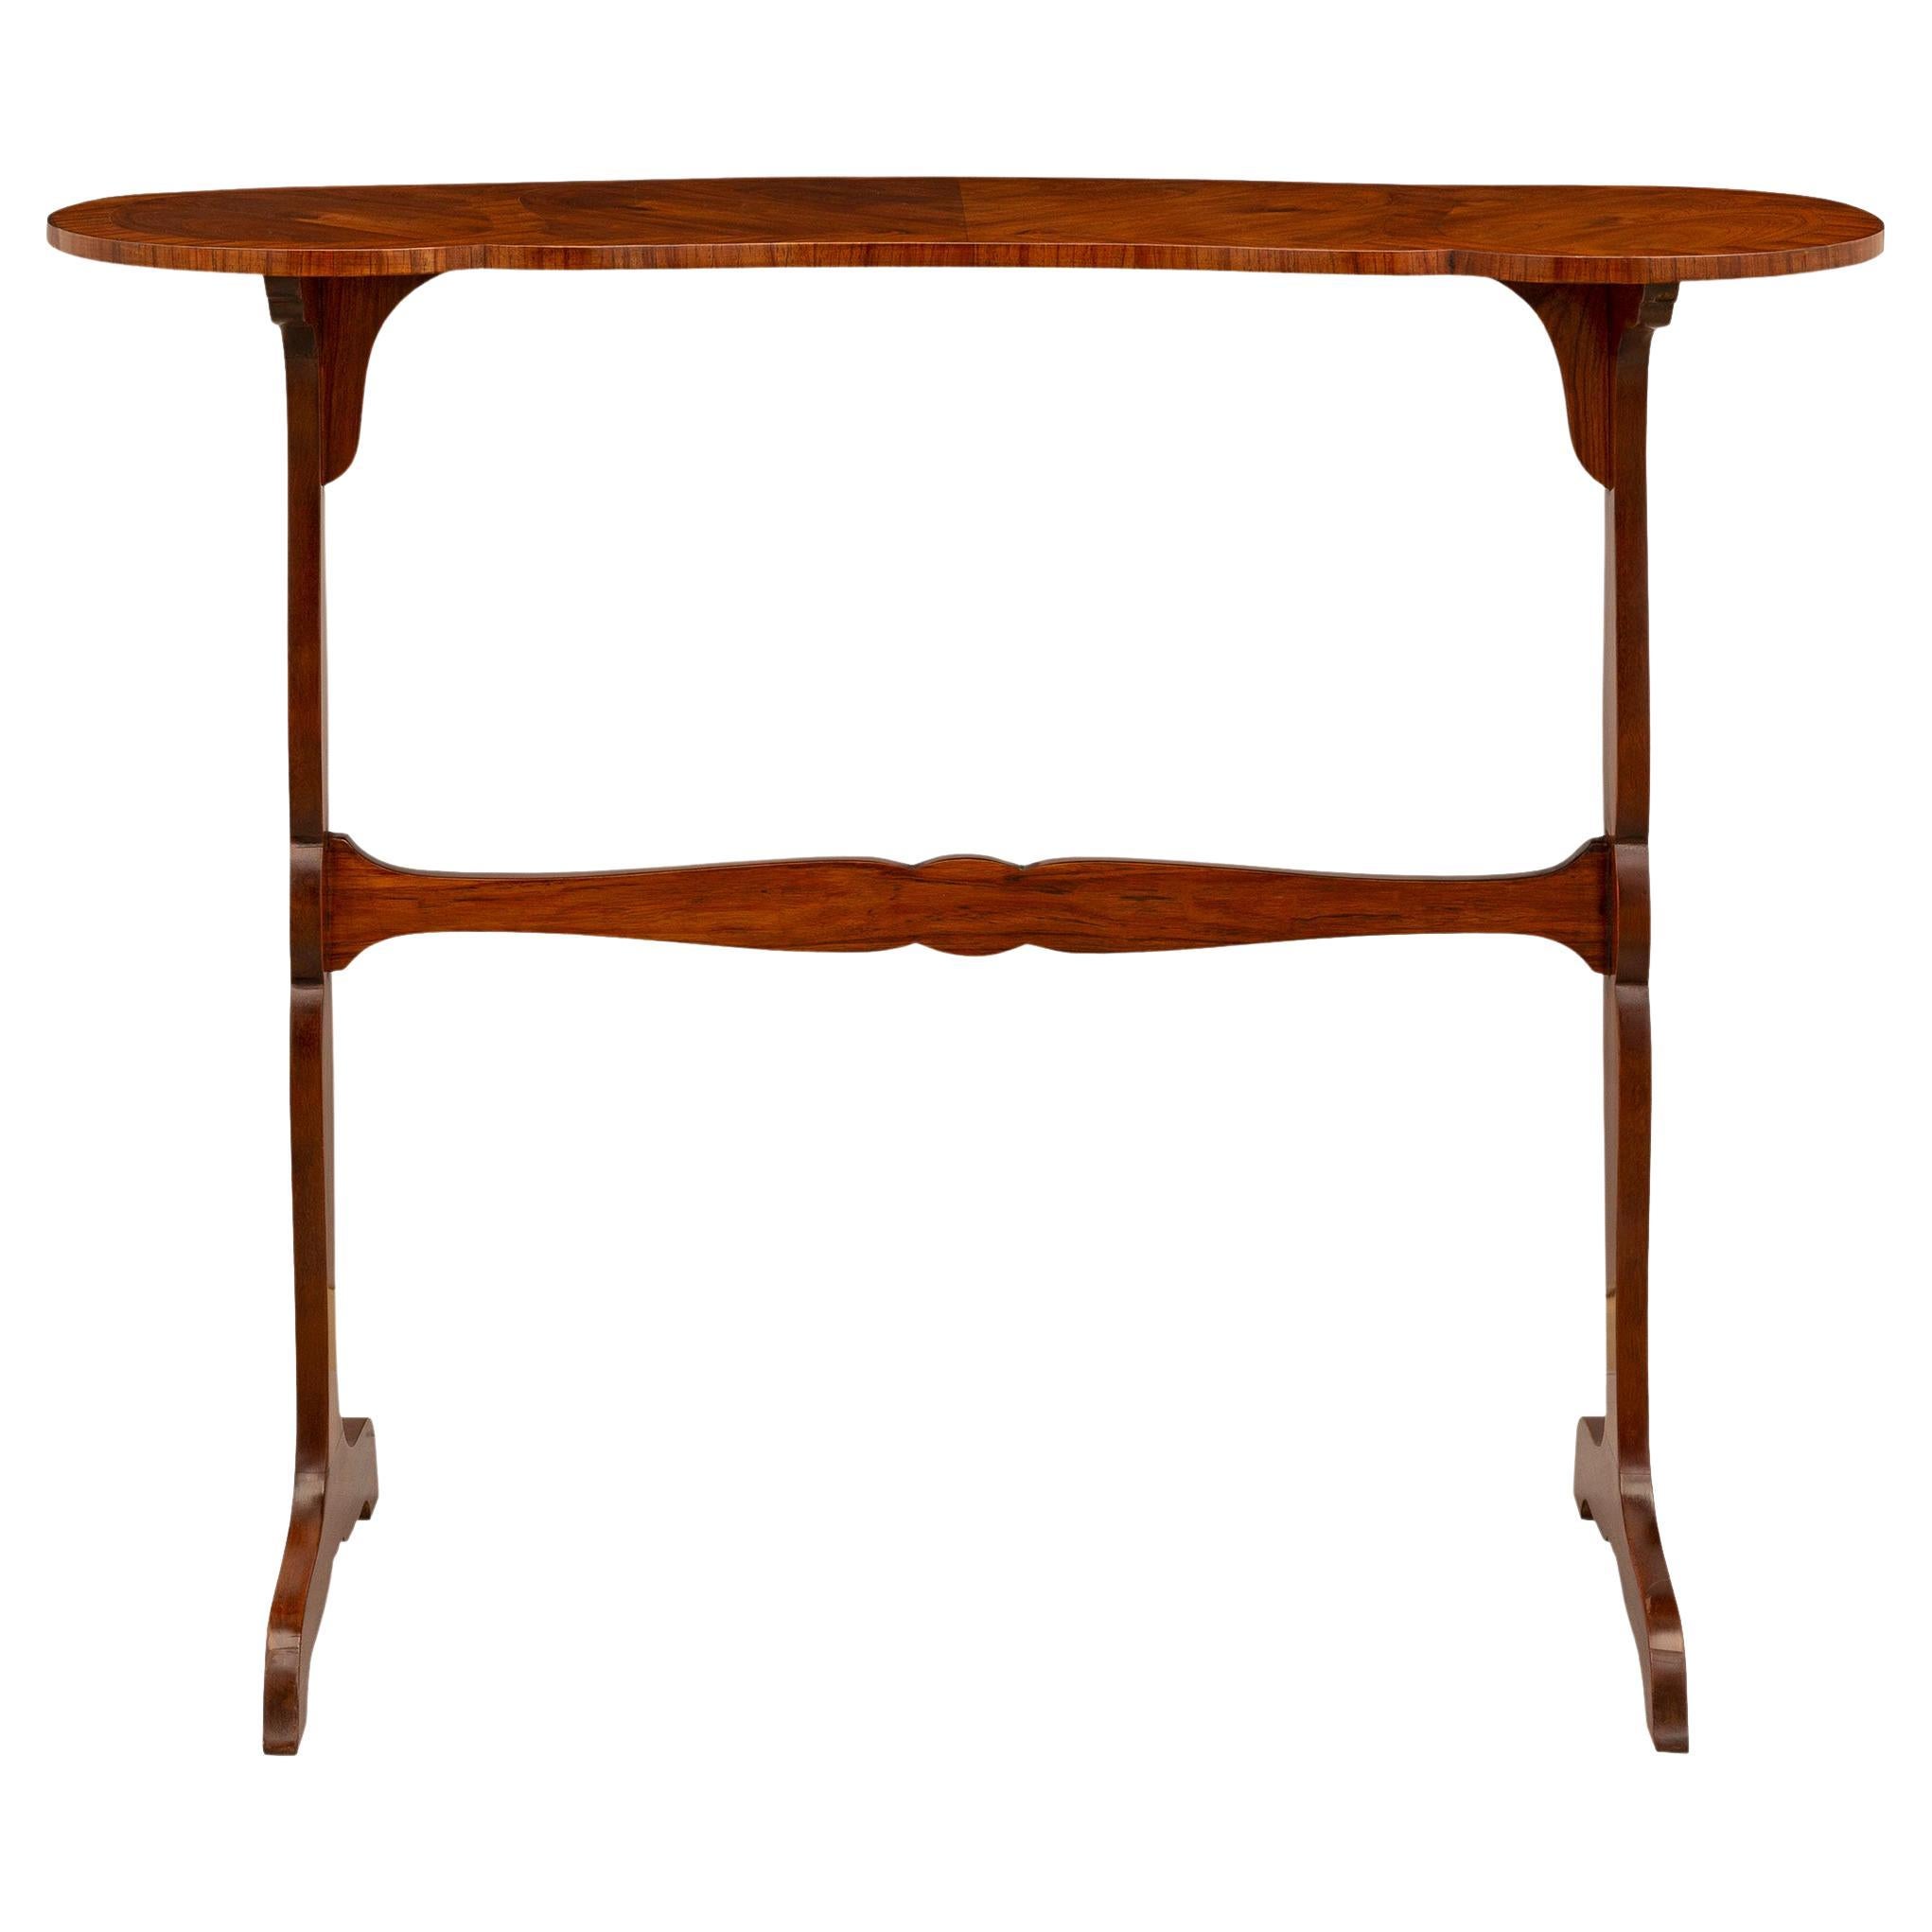 French 19th Century Louis XV Style Tulipwood Kidney Shape Table For Sale